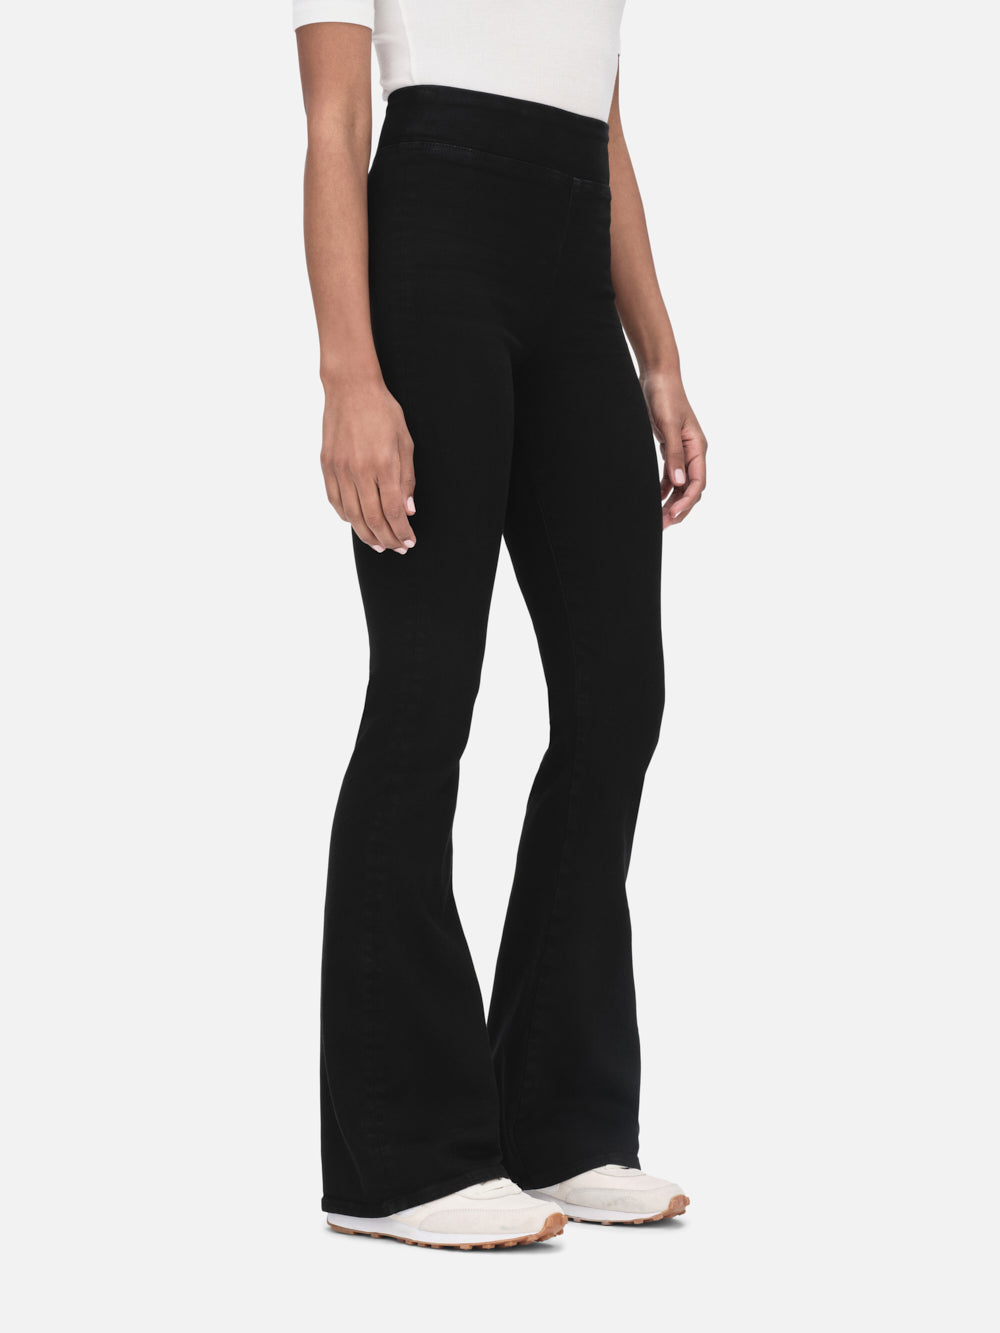  The Drop Women's Uma High Rise Fitted Slit Front Flare